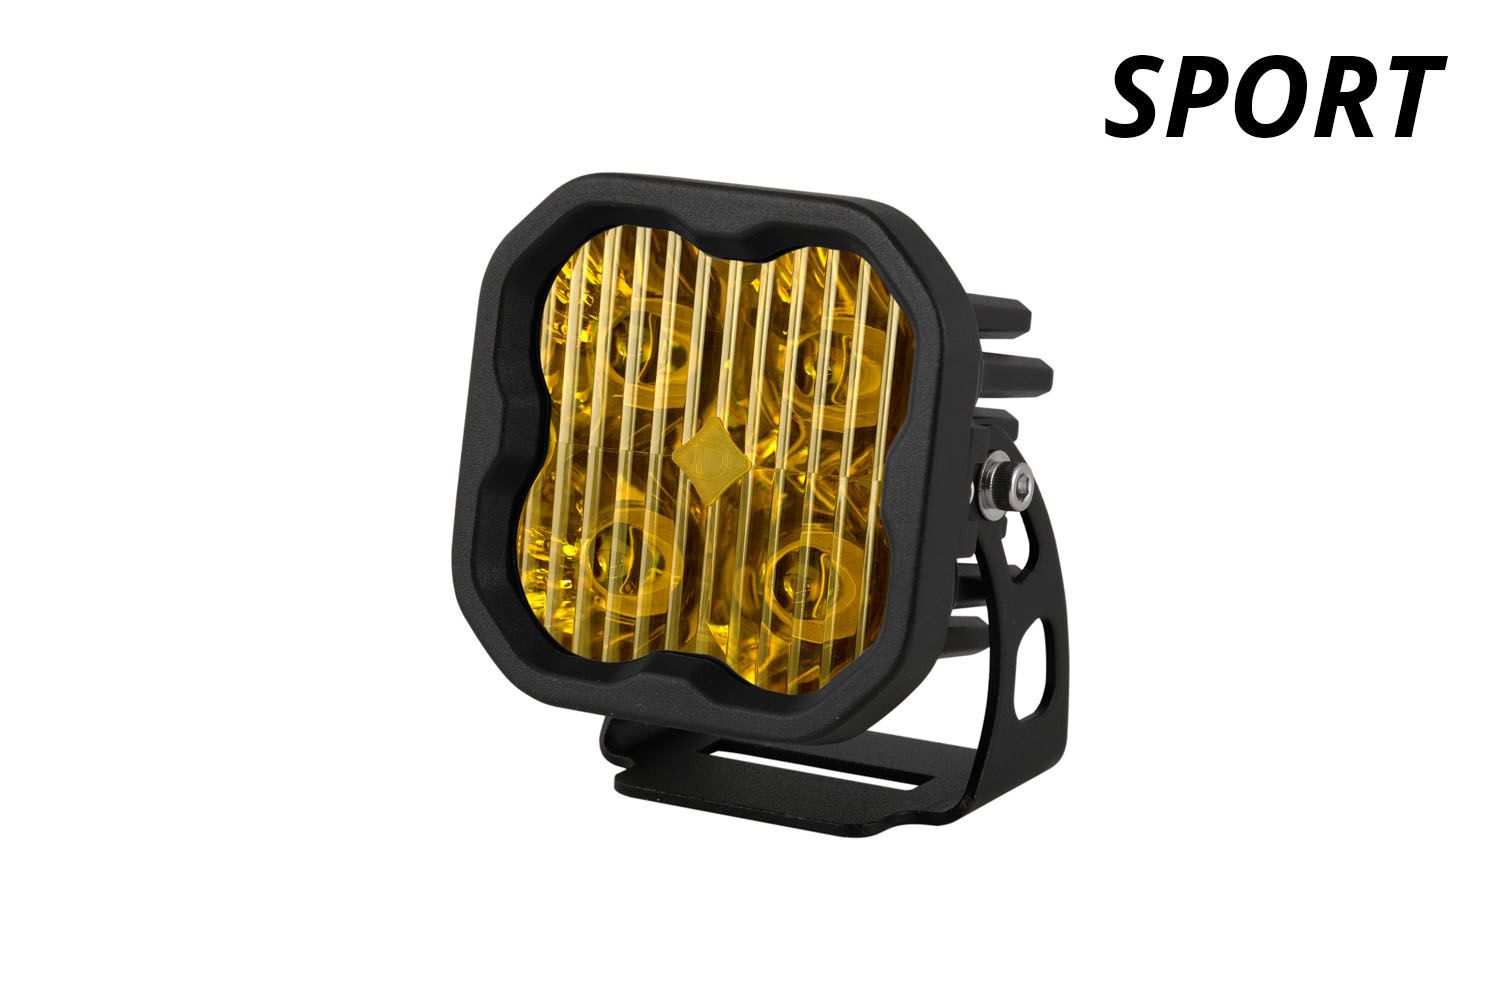 Stage Series 3" SAE Yellow Sport LED Pod (one)